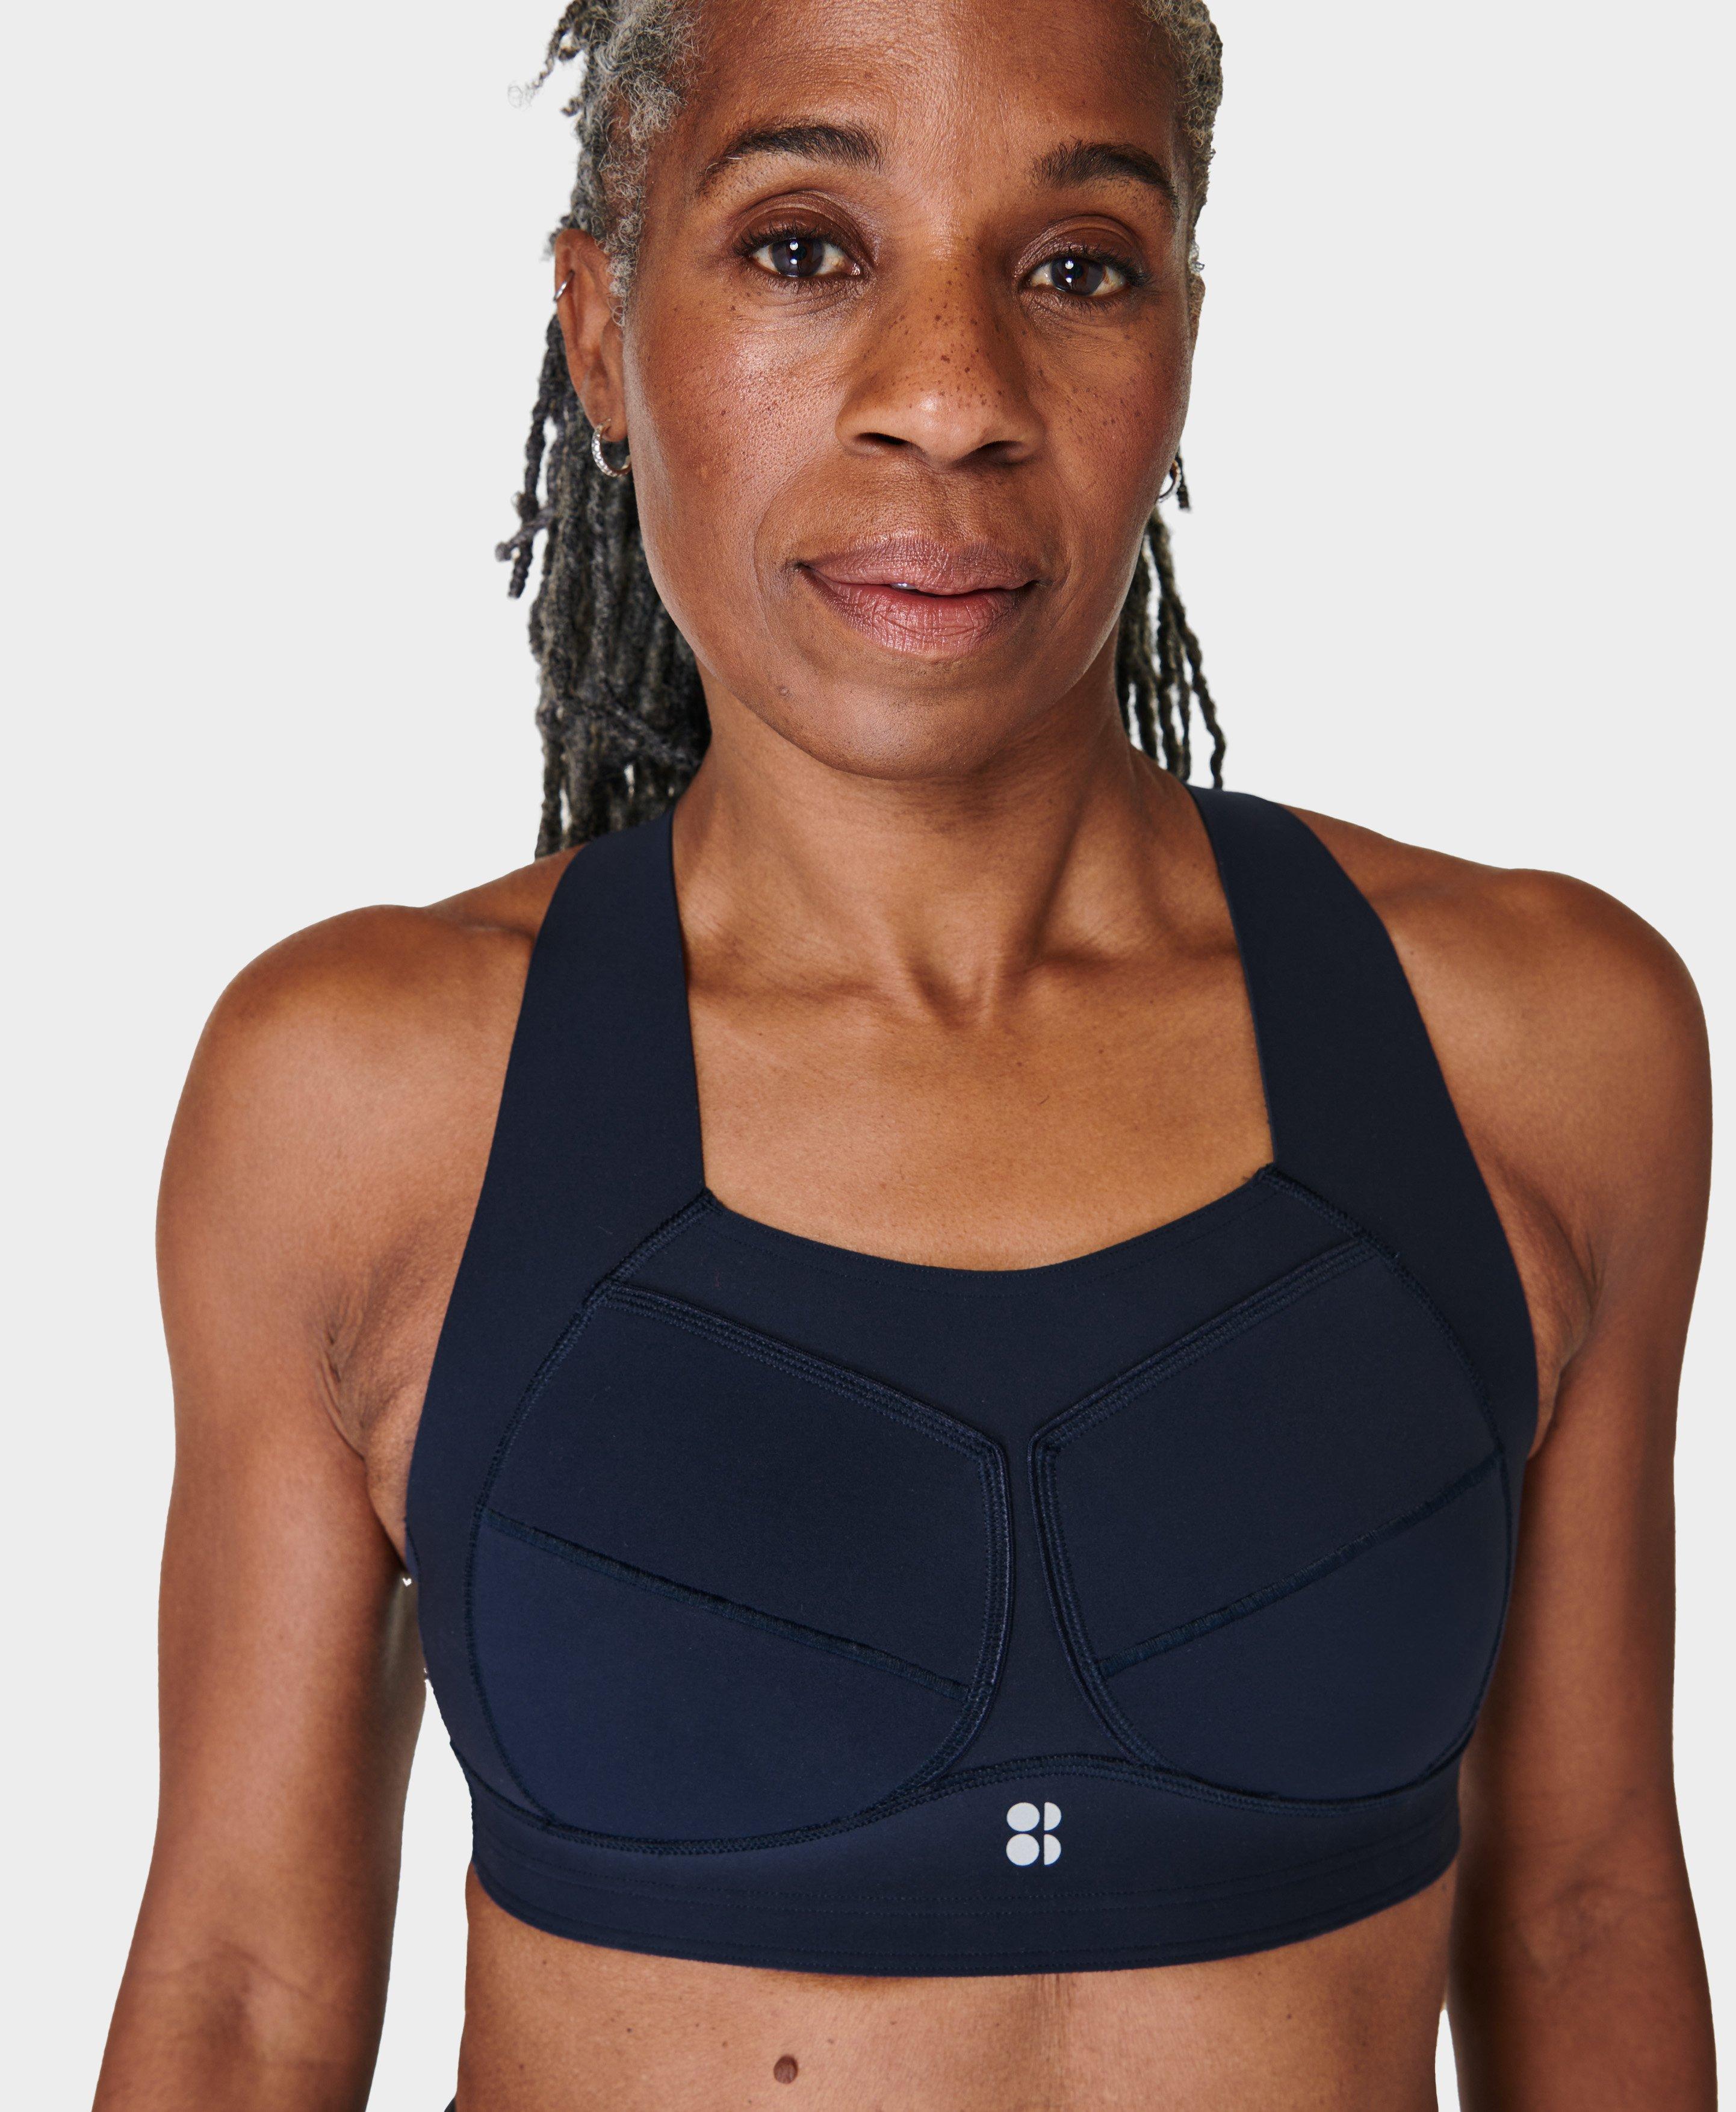 Her Universe Captain America Sports Bras for Women